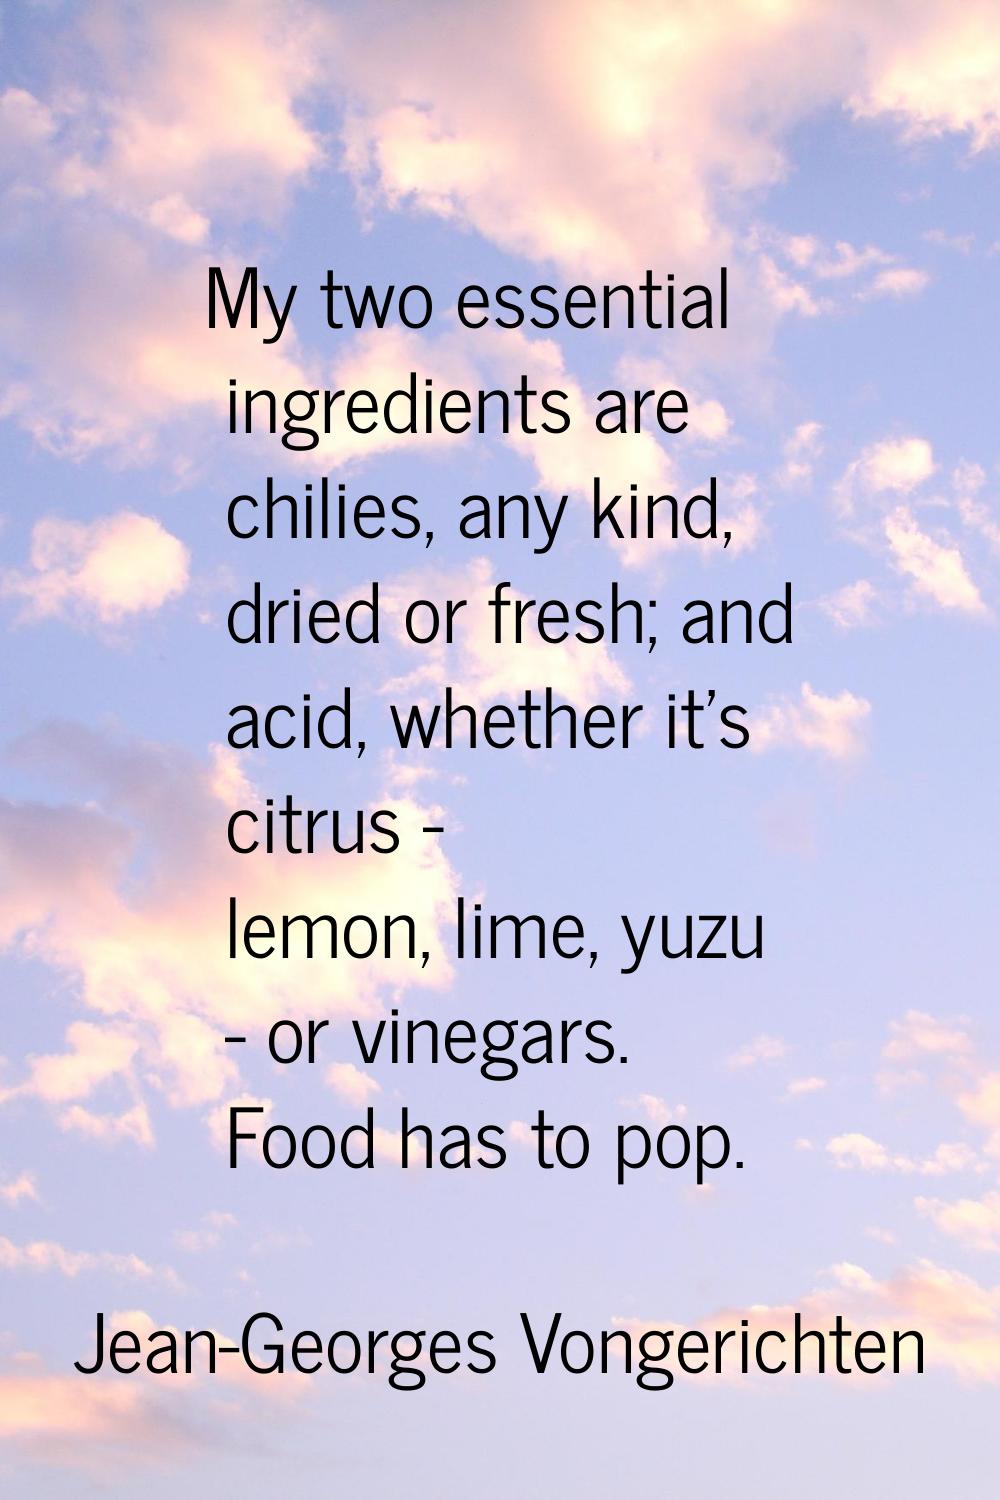 My two essential ingredients are chilies, any kind, dried or fresh; and acid, whether it's citrus -